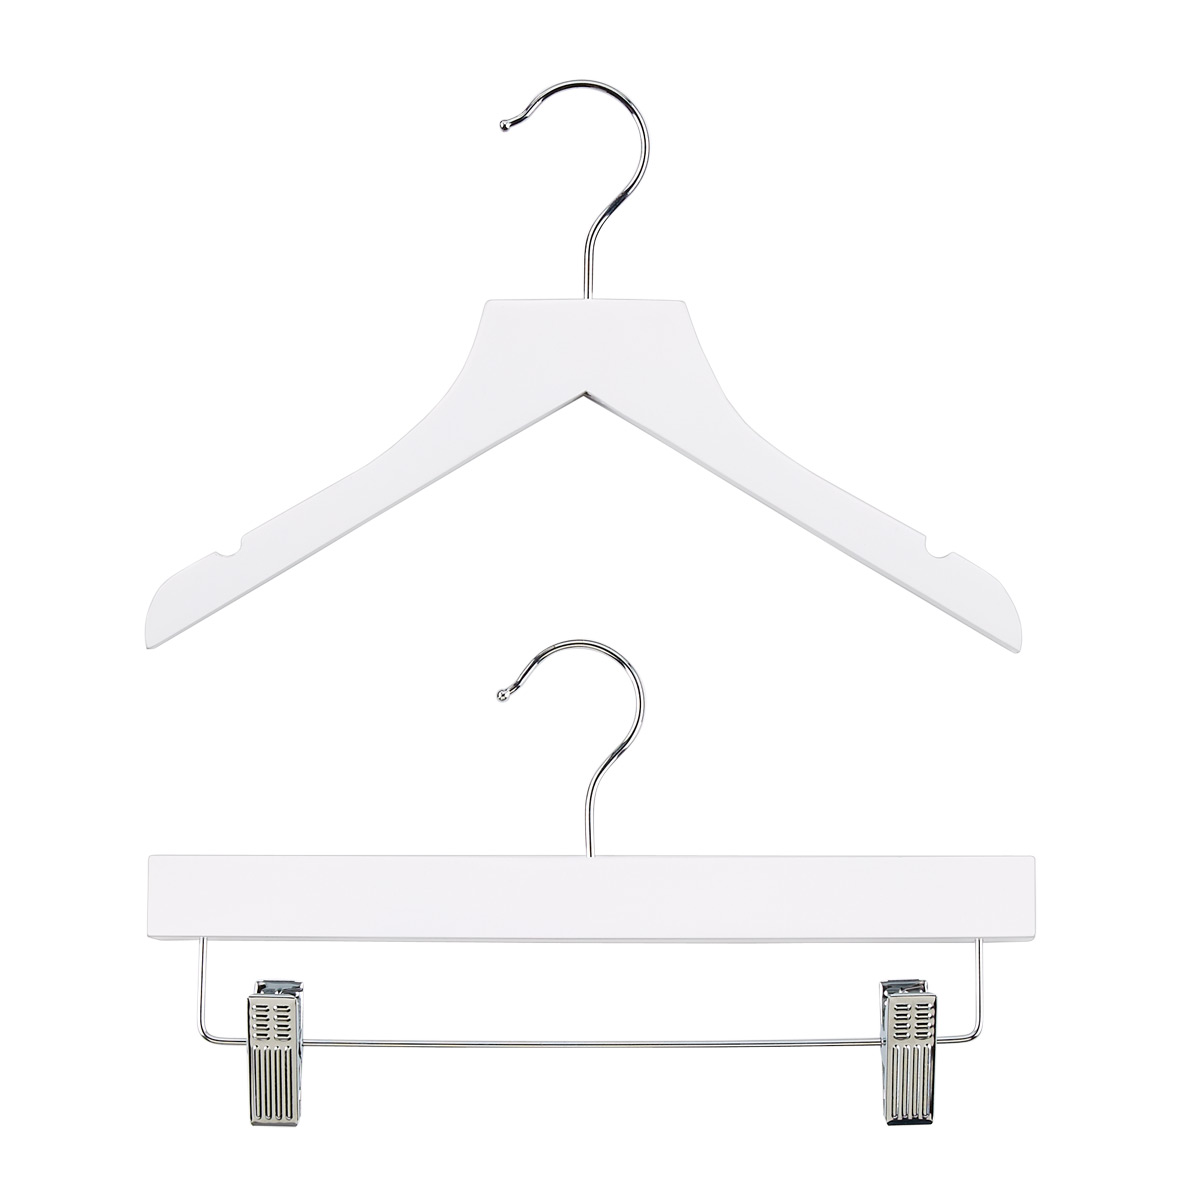 https://www.containerstore.com/catalogimages/383778/10079402g-kids-wood-hanger-white-pac.jpg